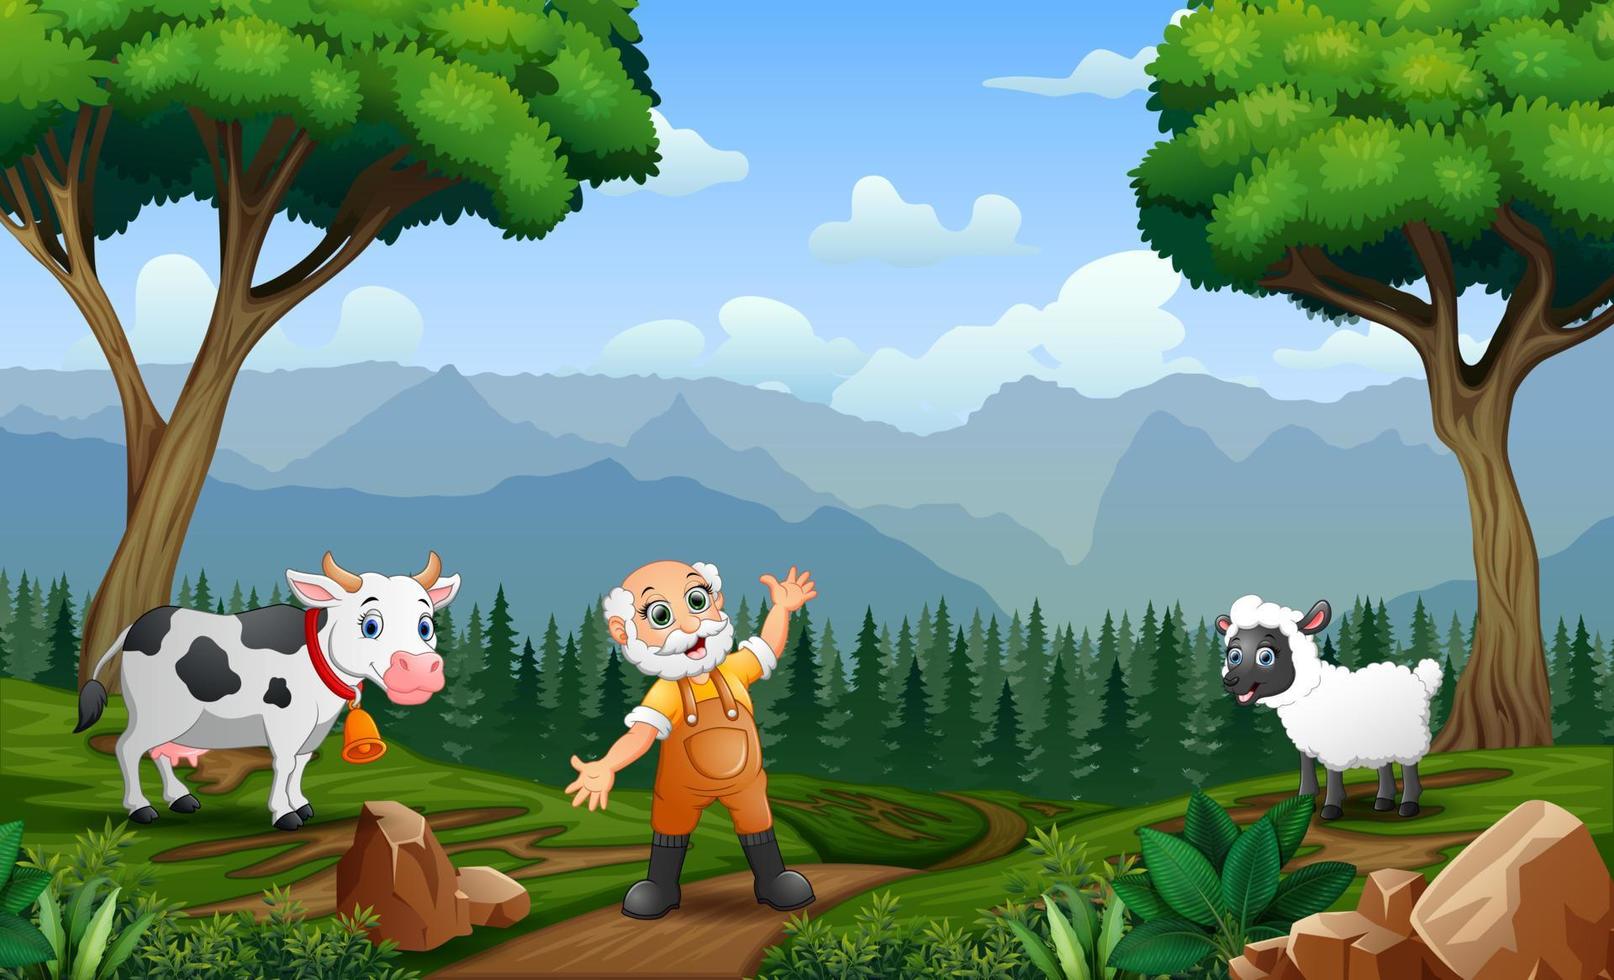 The old farmer herding cattle and sheep in the field vector